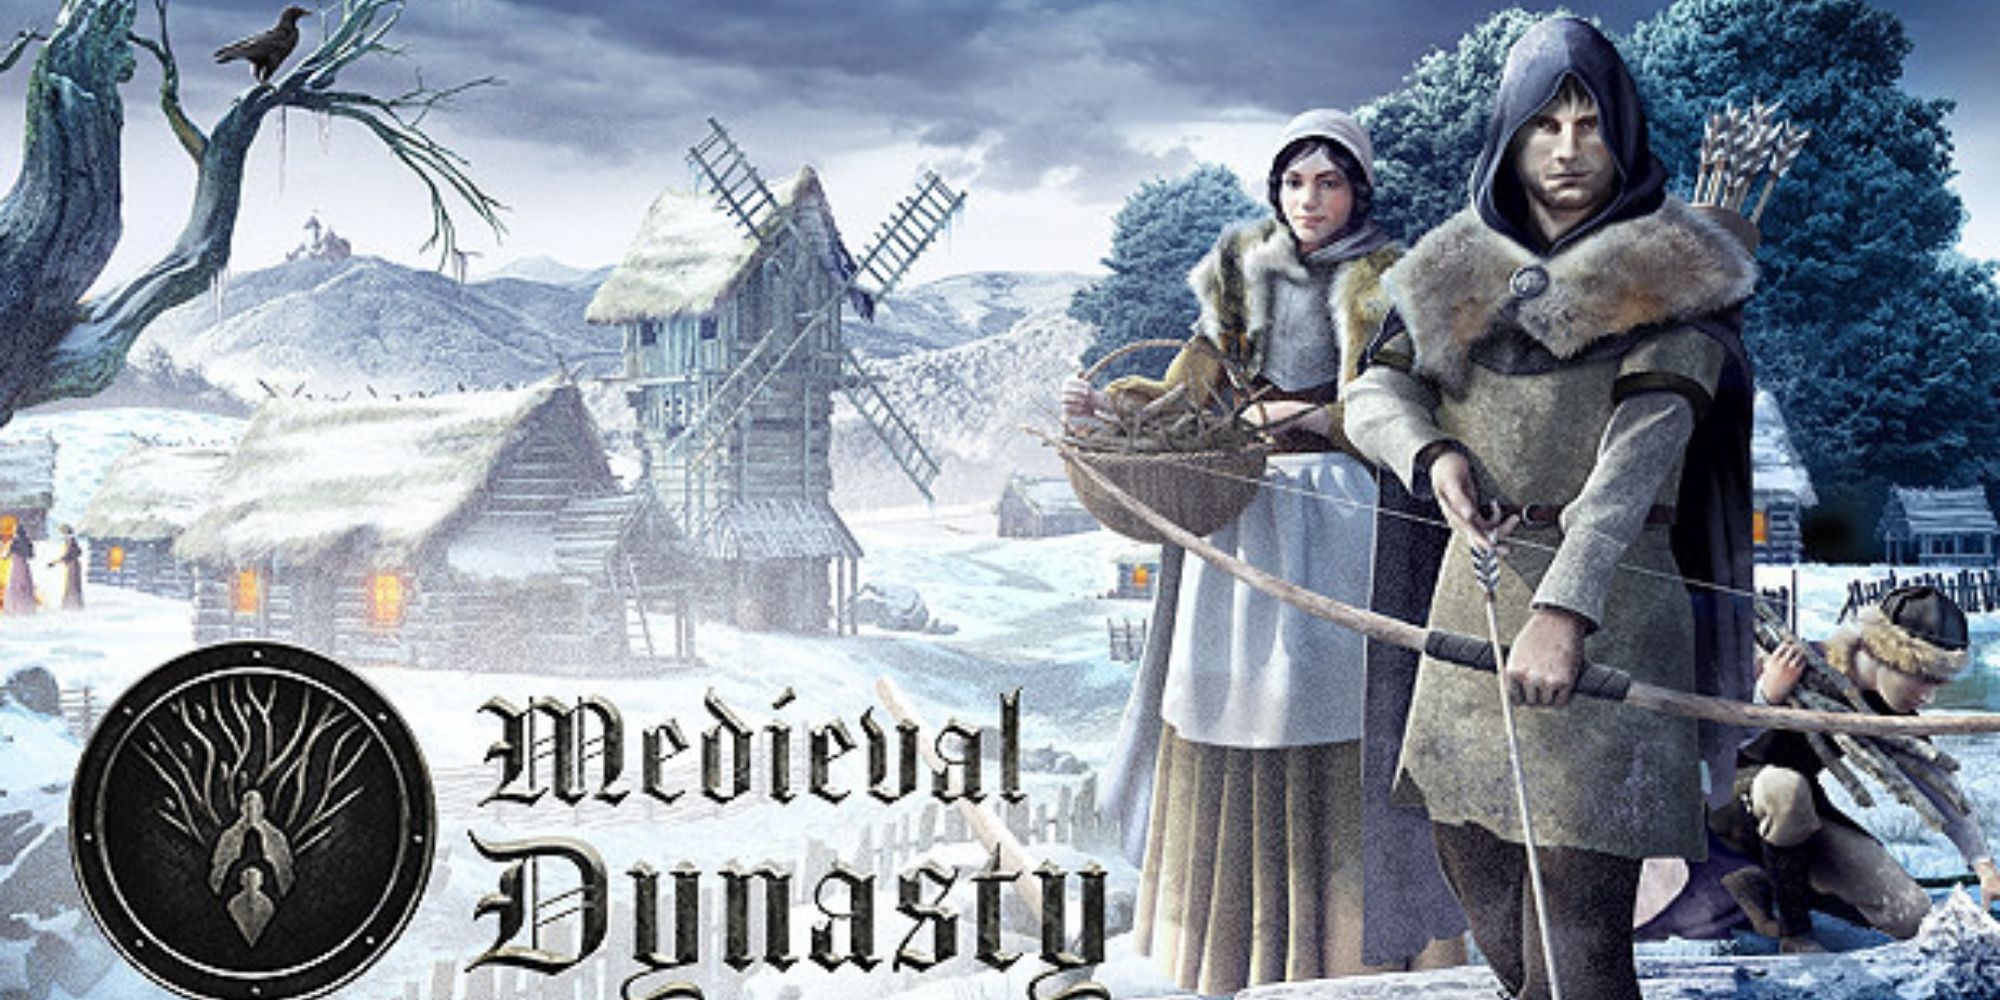 Promotional image of the game Medieval Dynasty.